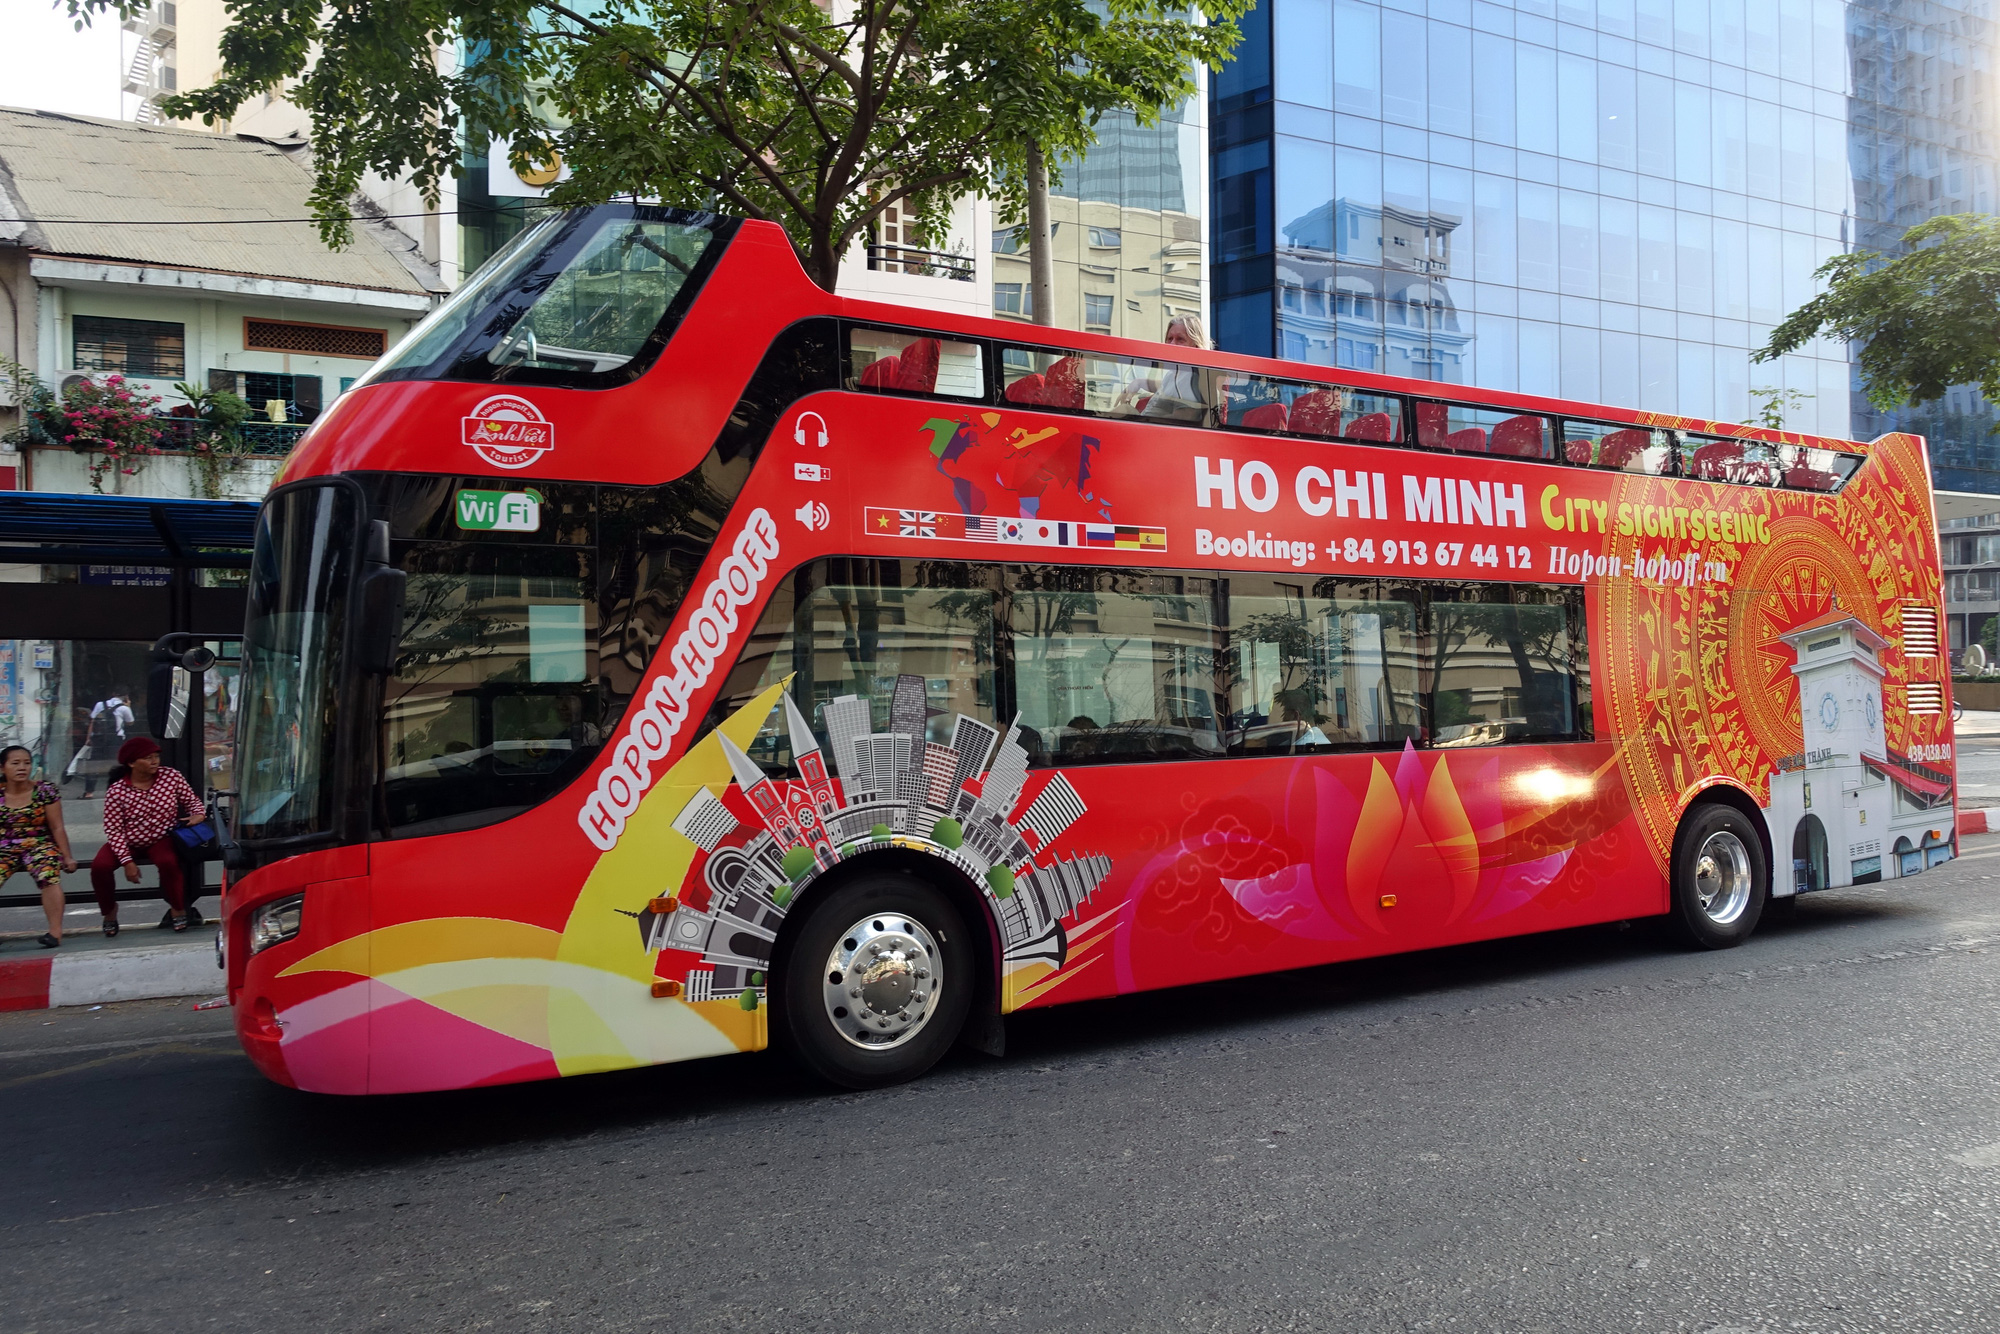 Ho Chi Minh City to launch hop on-hop off bus service next week